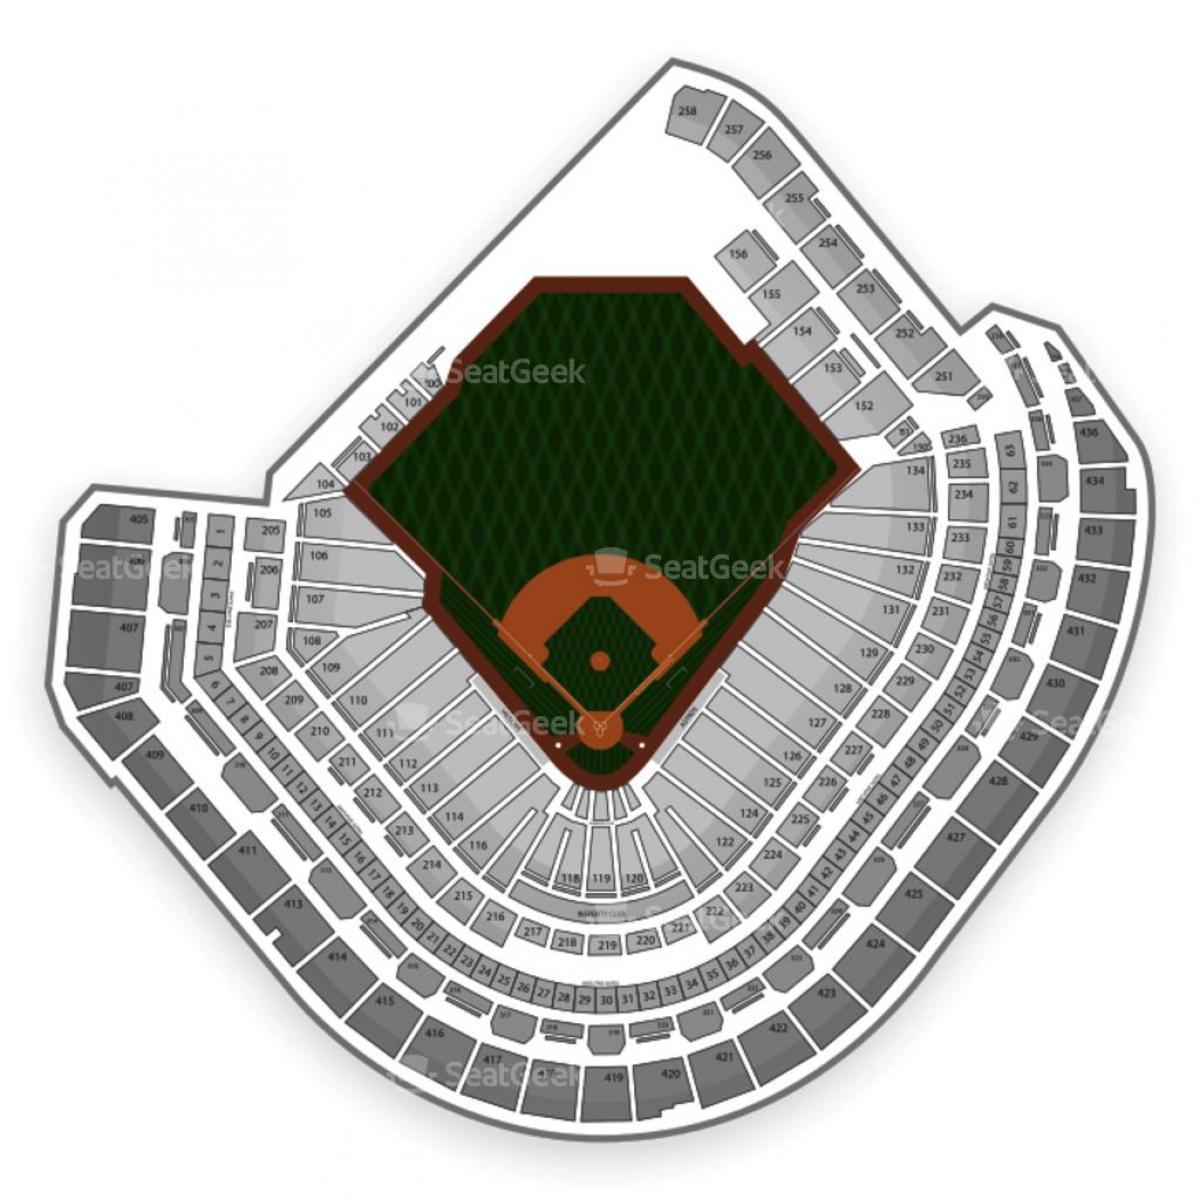 Minute Maid park seating map Map of Minute Maid park seating (Texas